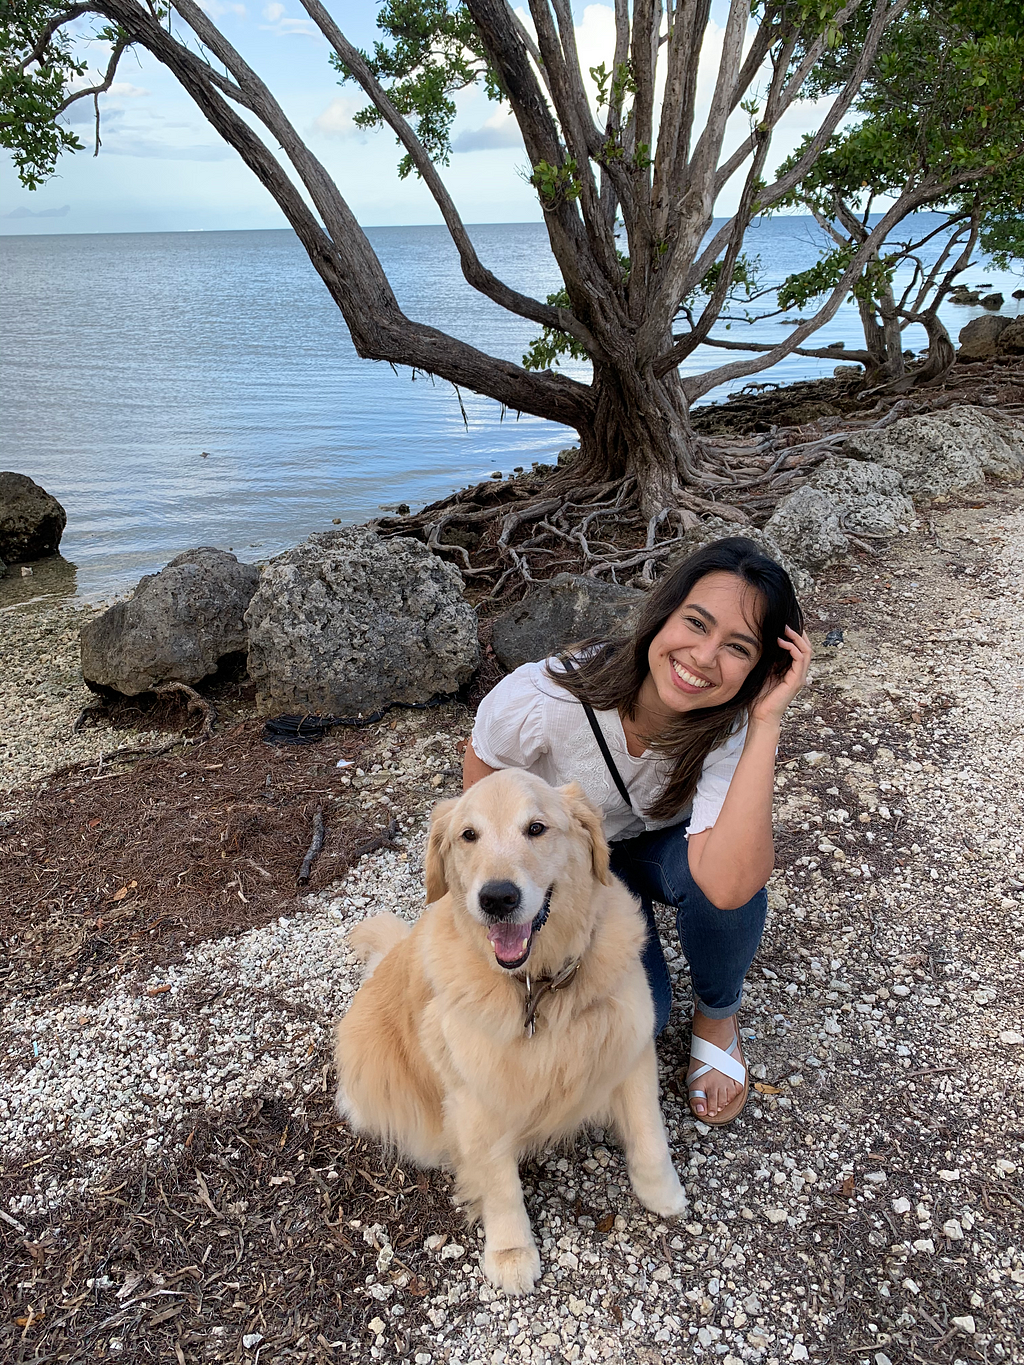 Angie and her golden retriever by the water.